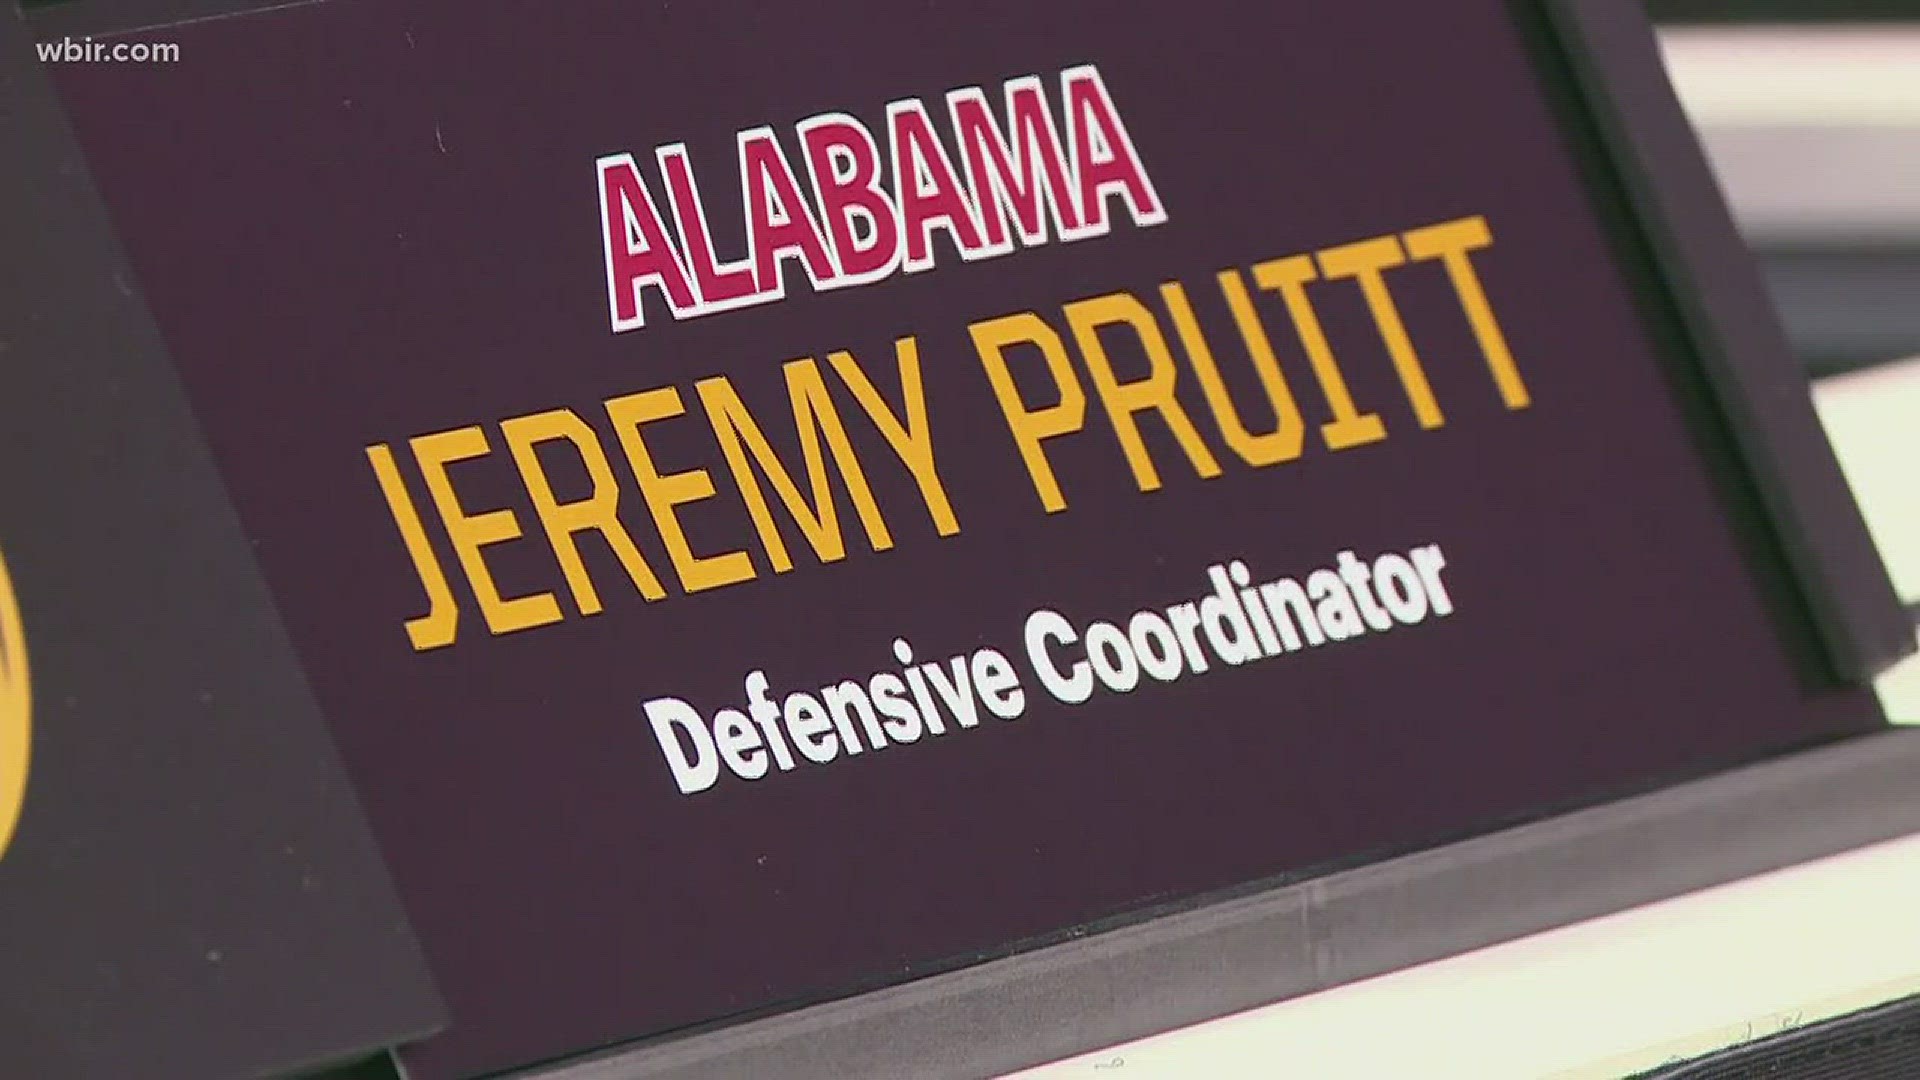 Tennessee's head coach, Jeremy Pruitt, and defensive coordinator, Kevin Sherrer, are good friends and Monday they'll compete against each other on the staffs of Alabama and Georgia in the National Championship Game.